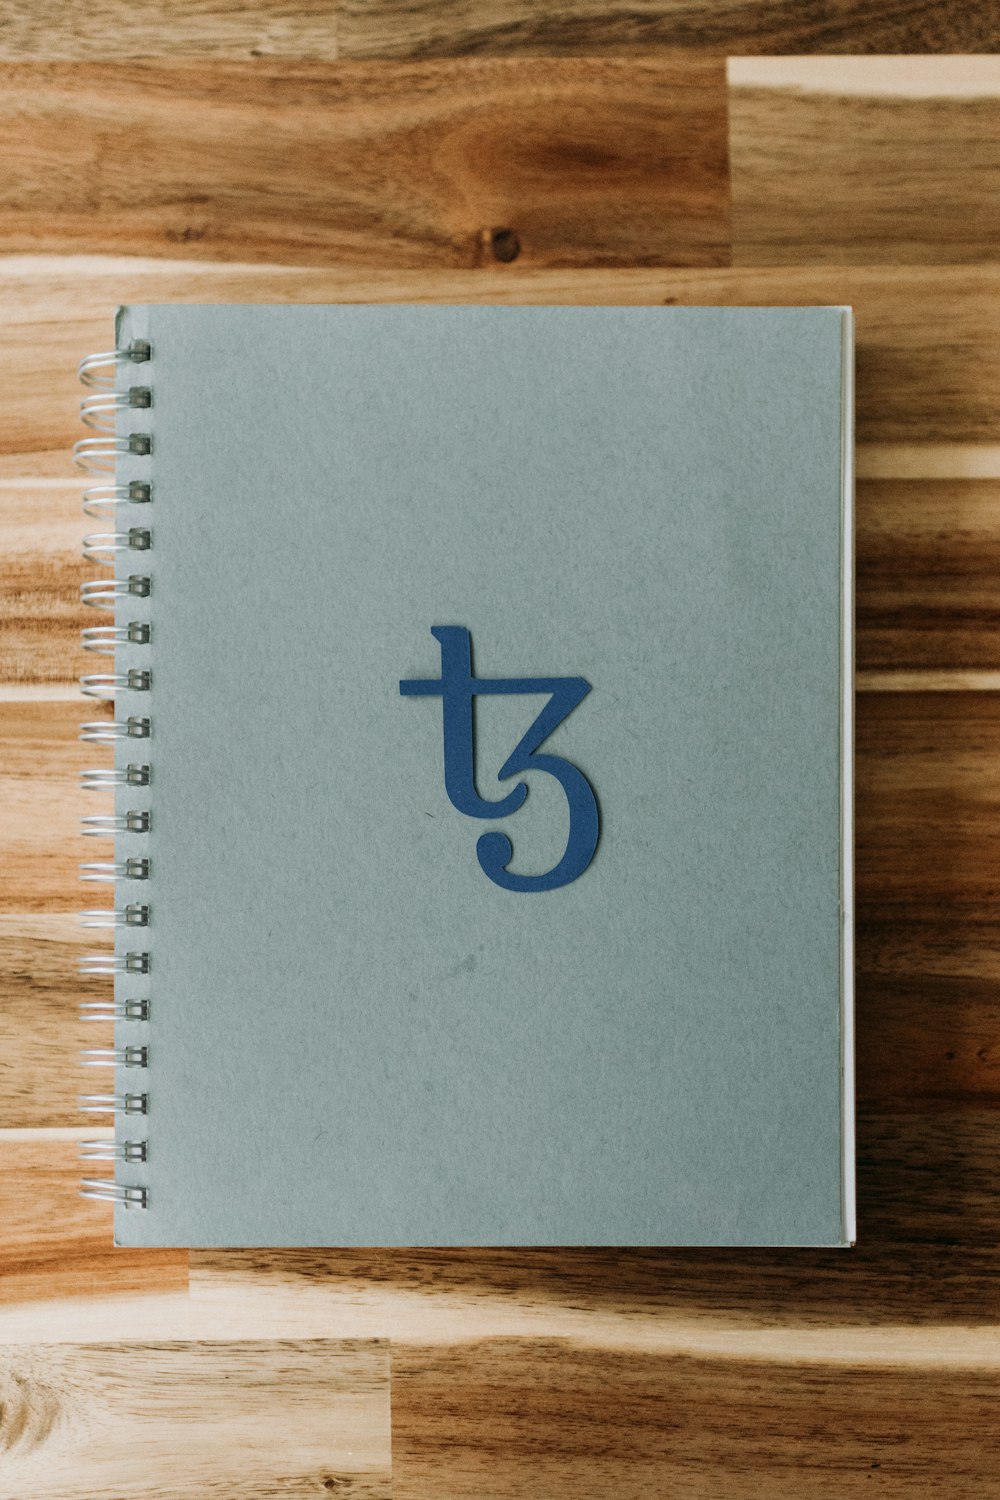 a spiral notebook with the letter j on it